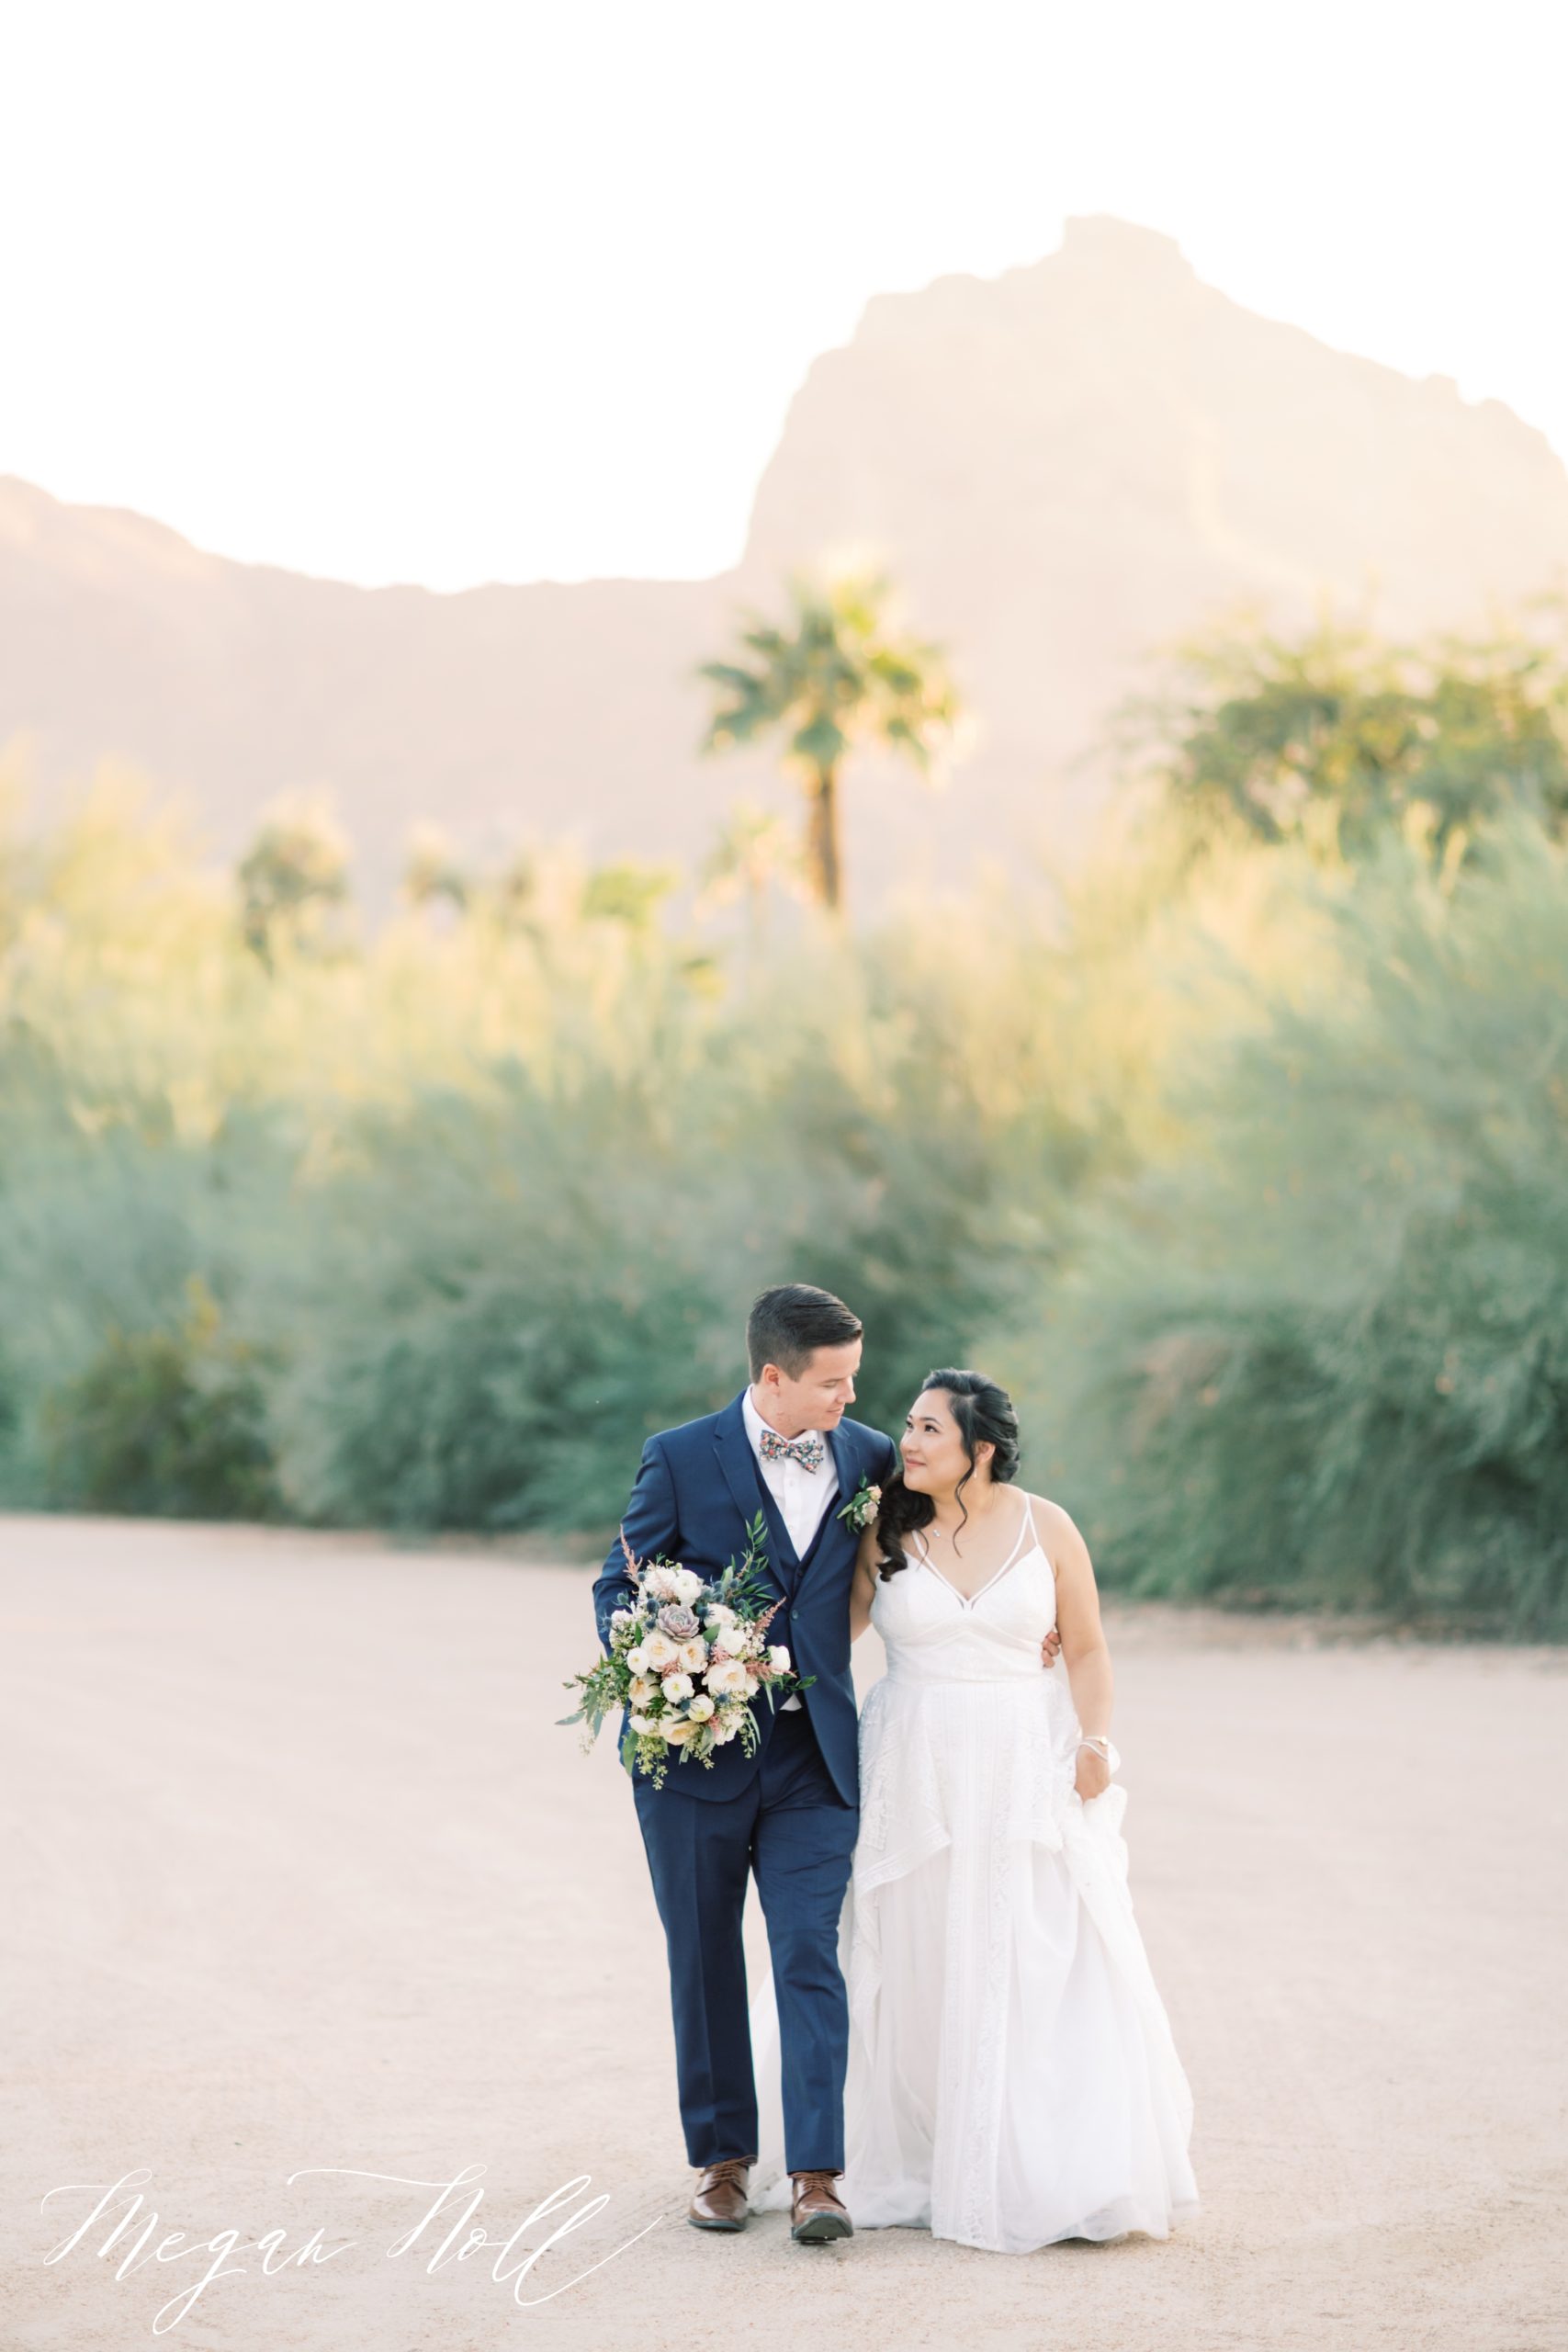 Destionation Wedding Pictures at Sunset with Camelback Mountain in the Background at El Chorro Wedding